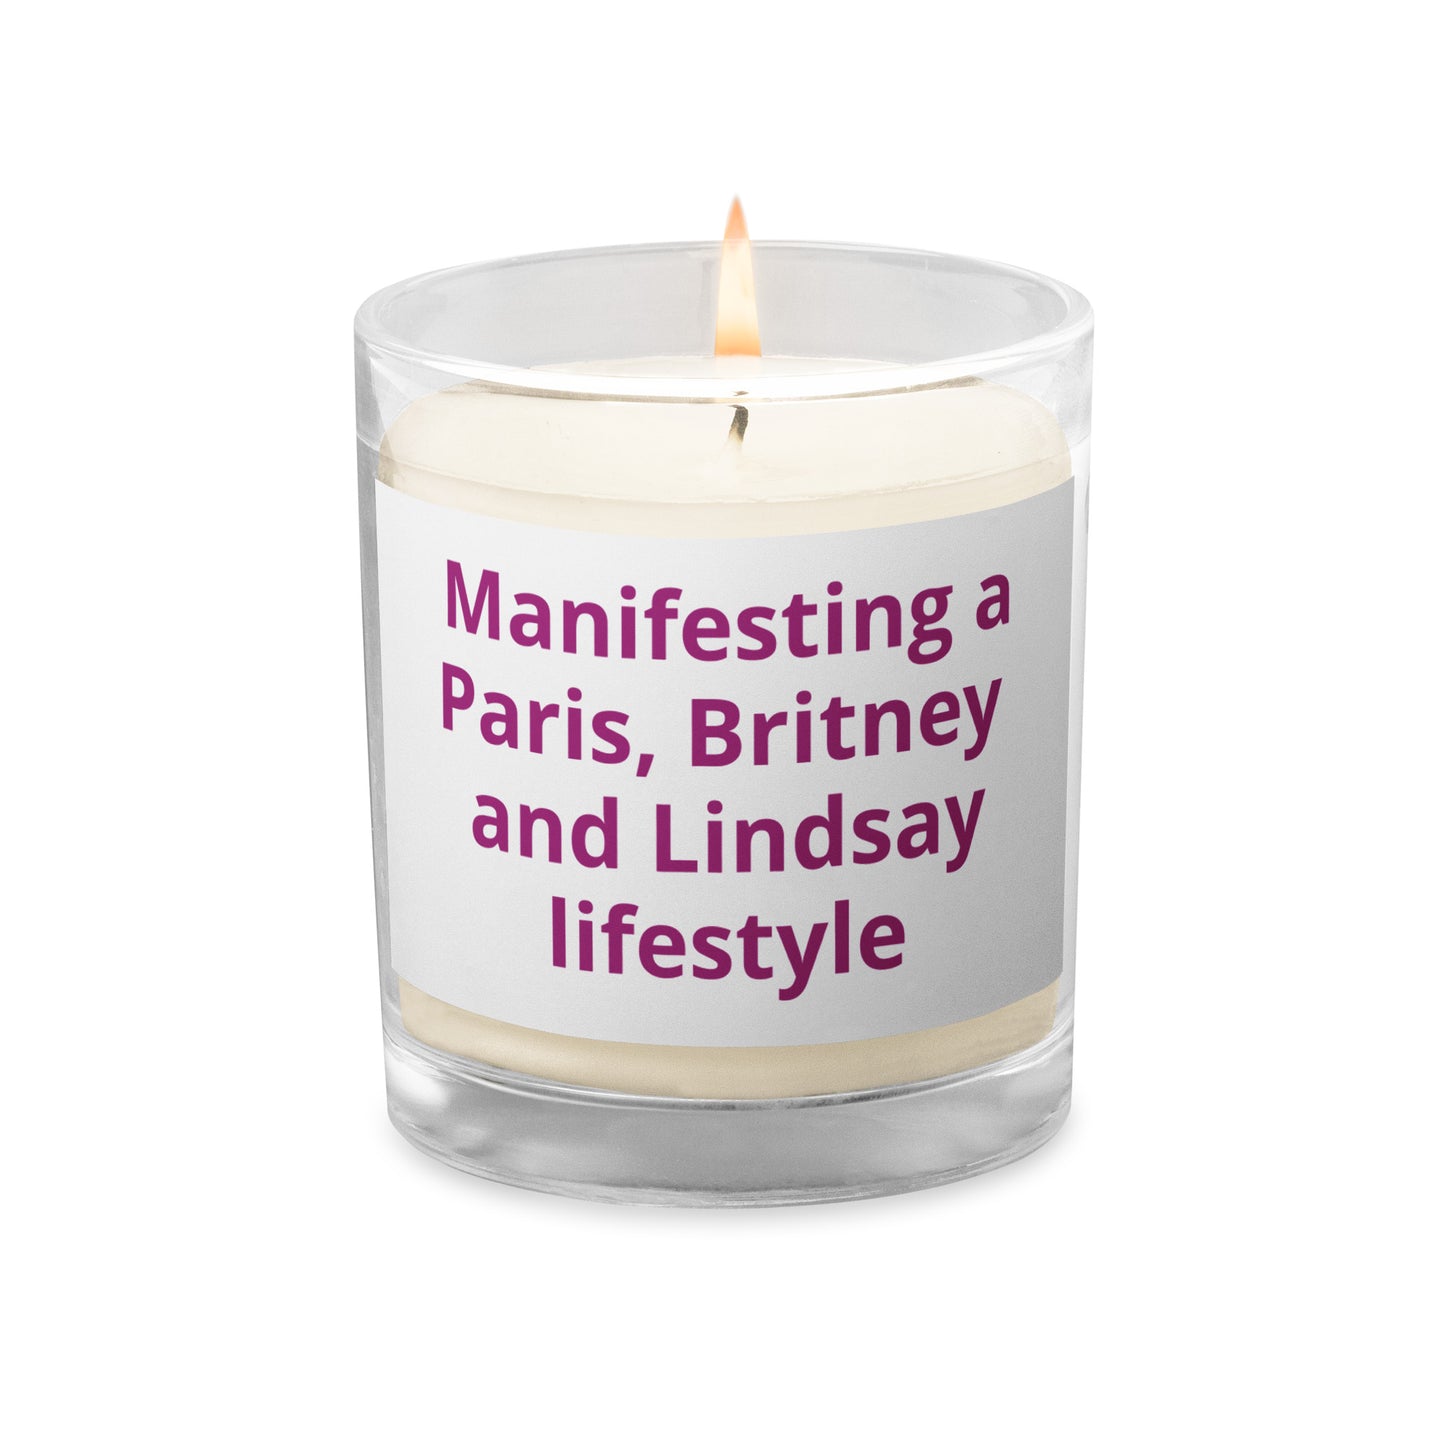 Manifesting Paris, Britney and Lindsay wax candle